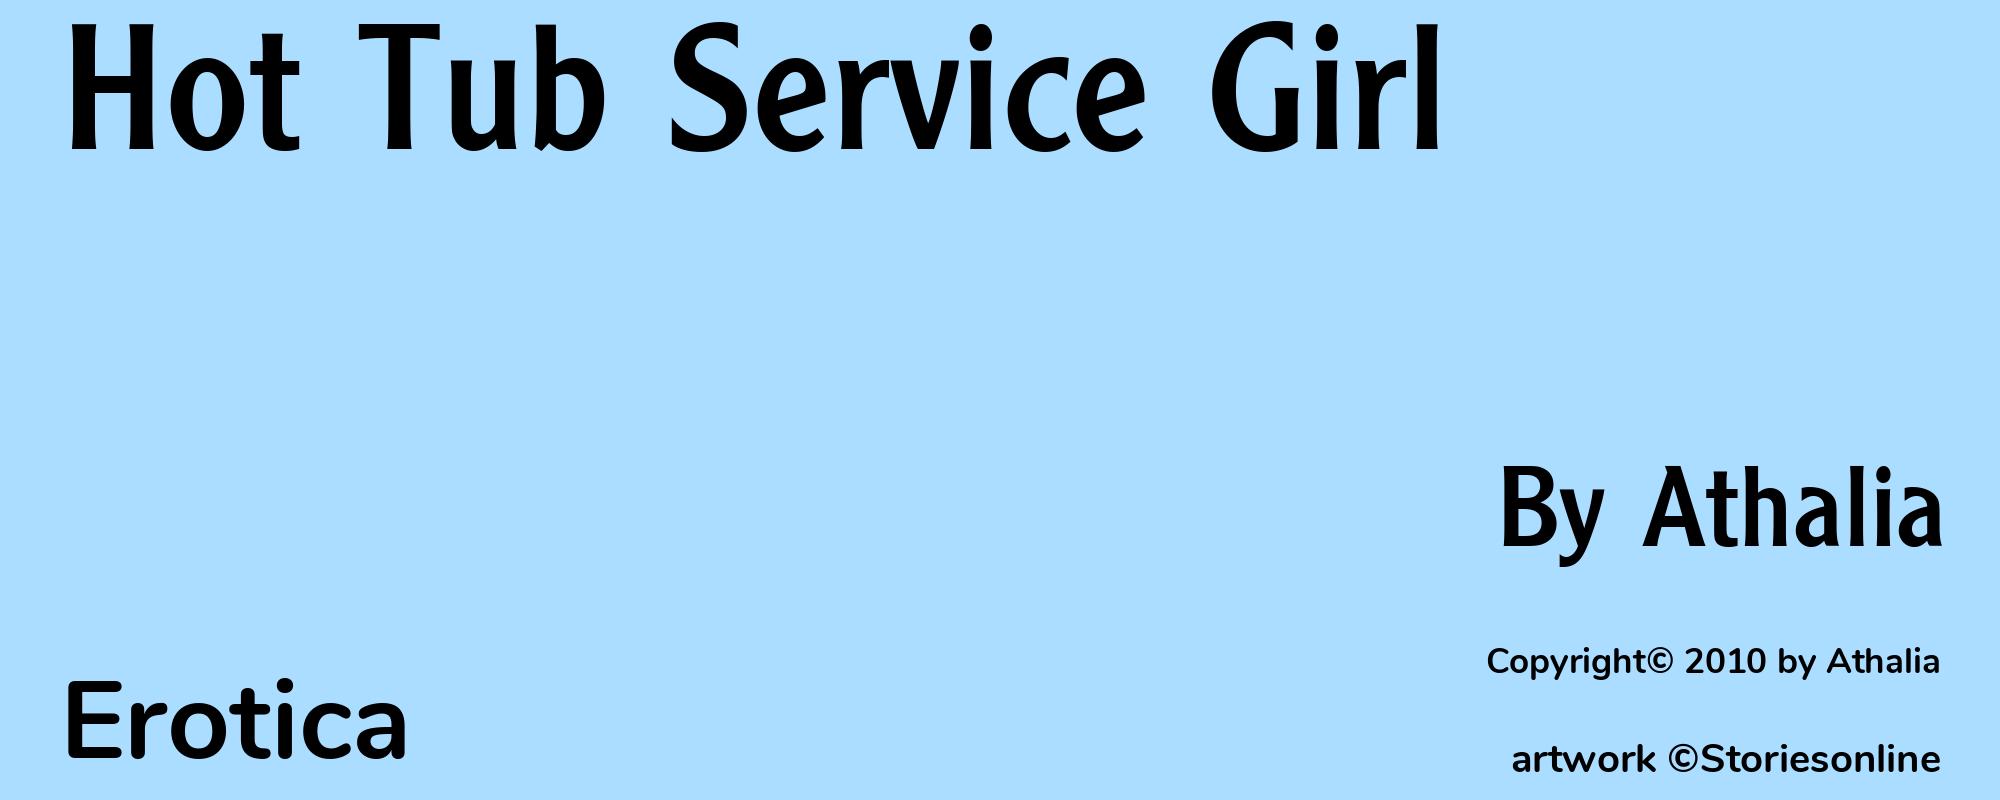 Hot Tub Service Girl - Cover